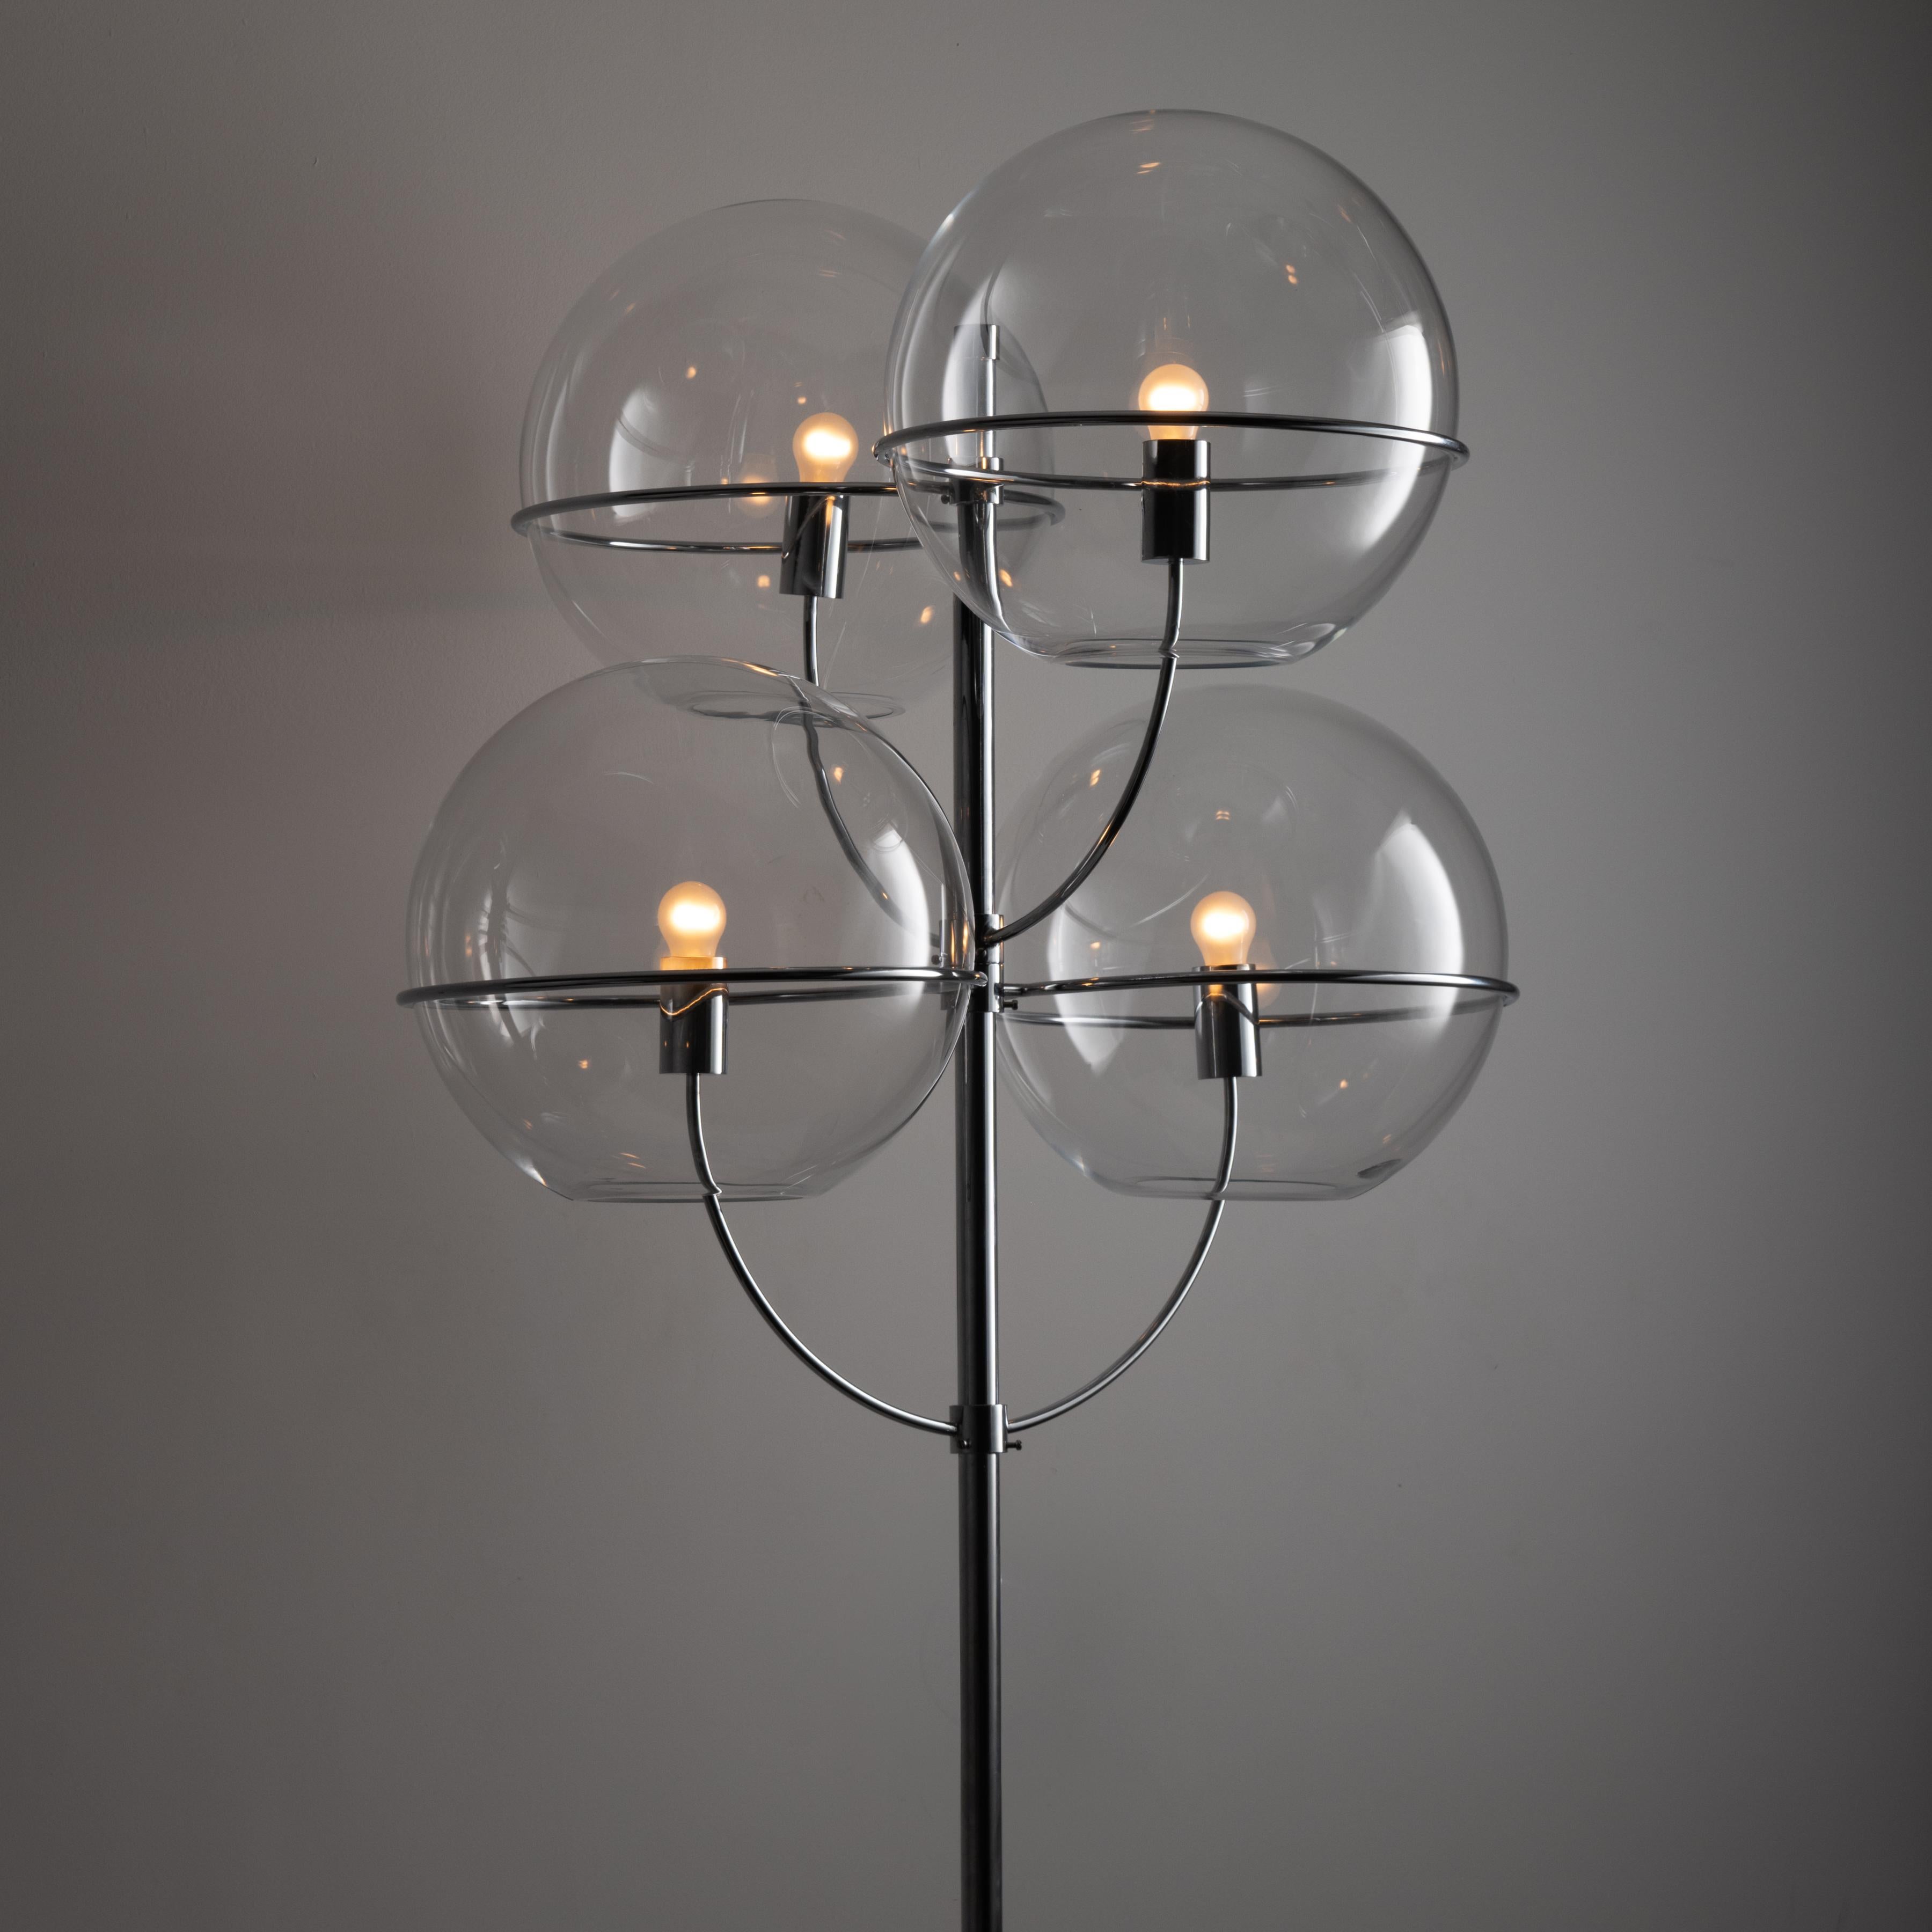 Large and rare 'Lyndon' floor lamp by Vico Magistretti for Knoll. Four clear glass globes nested on chrome branch stems in this dramatically large floor lamp. The lamp is secured and grounded by a hefty piece of carrara marble. The lamp holds four